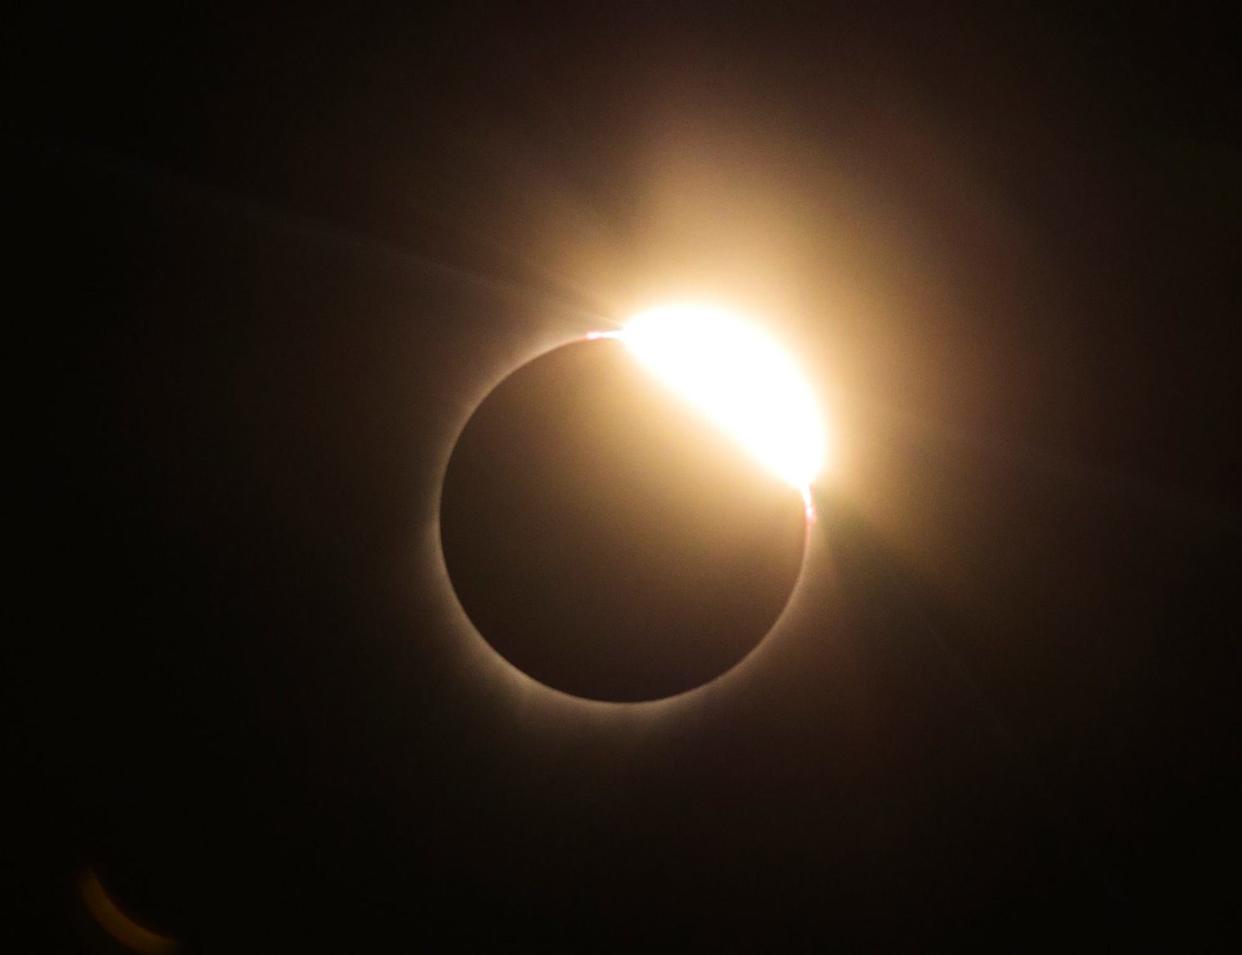 The sun begins to peek from behind the moon at the end of the total eclipse in 2017.